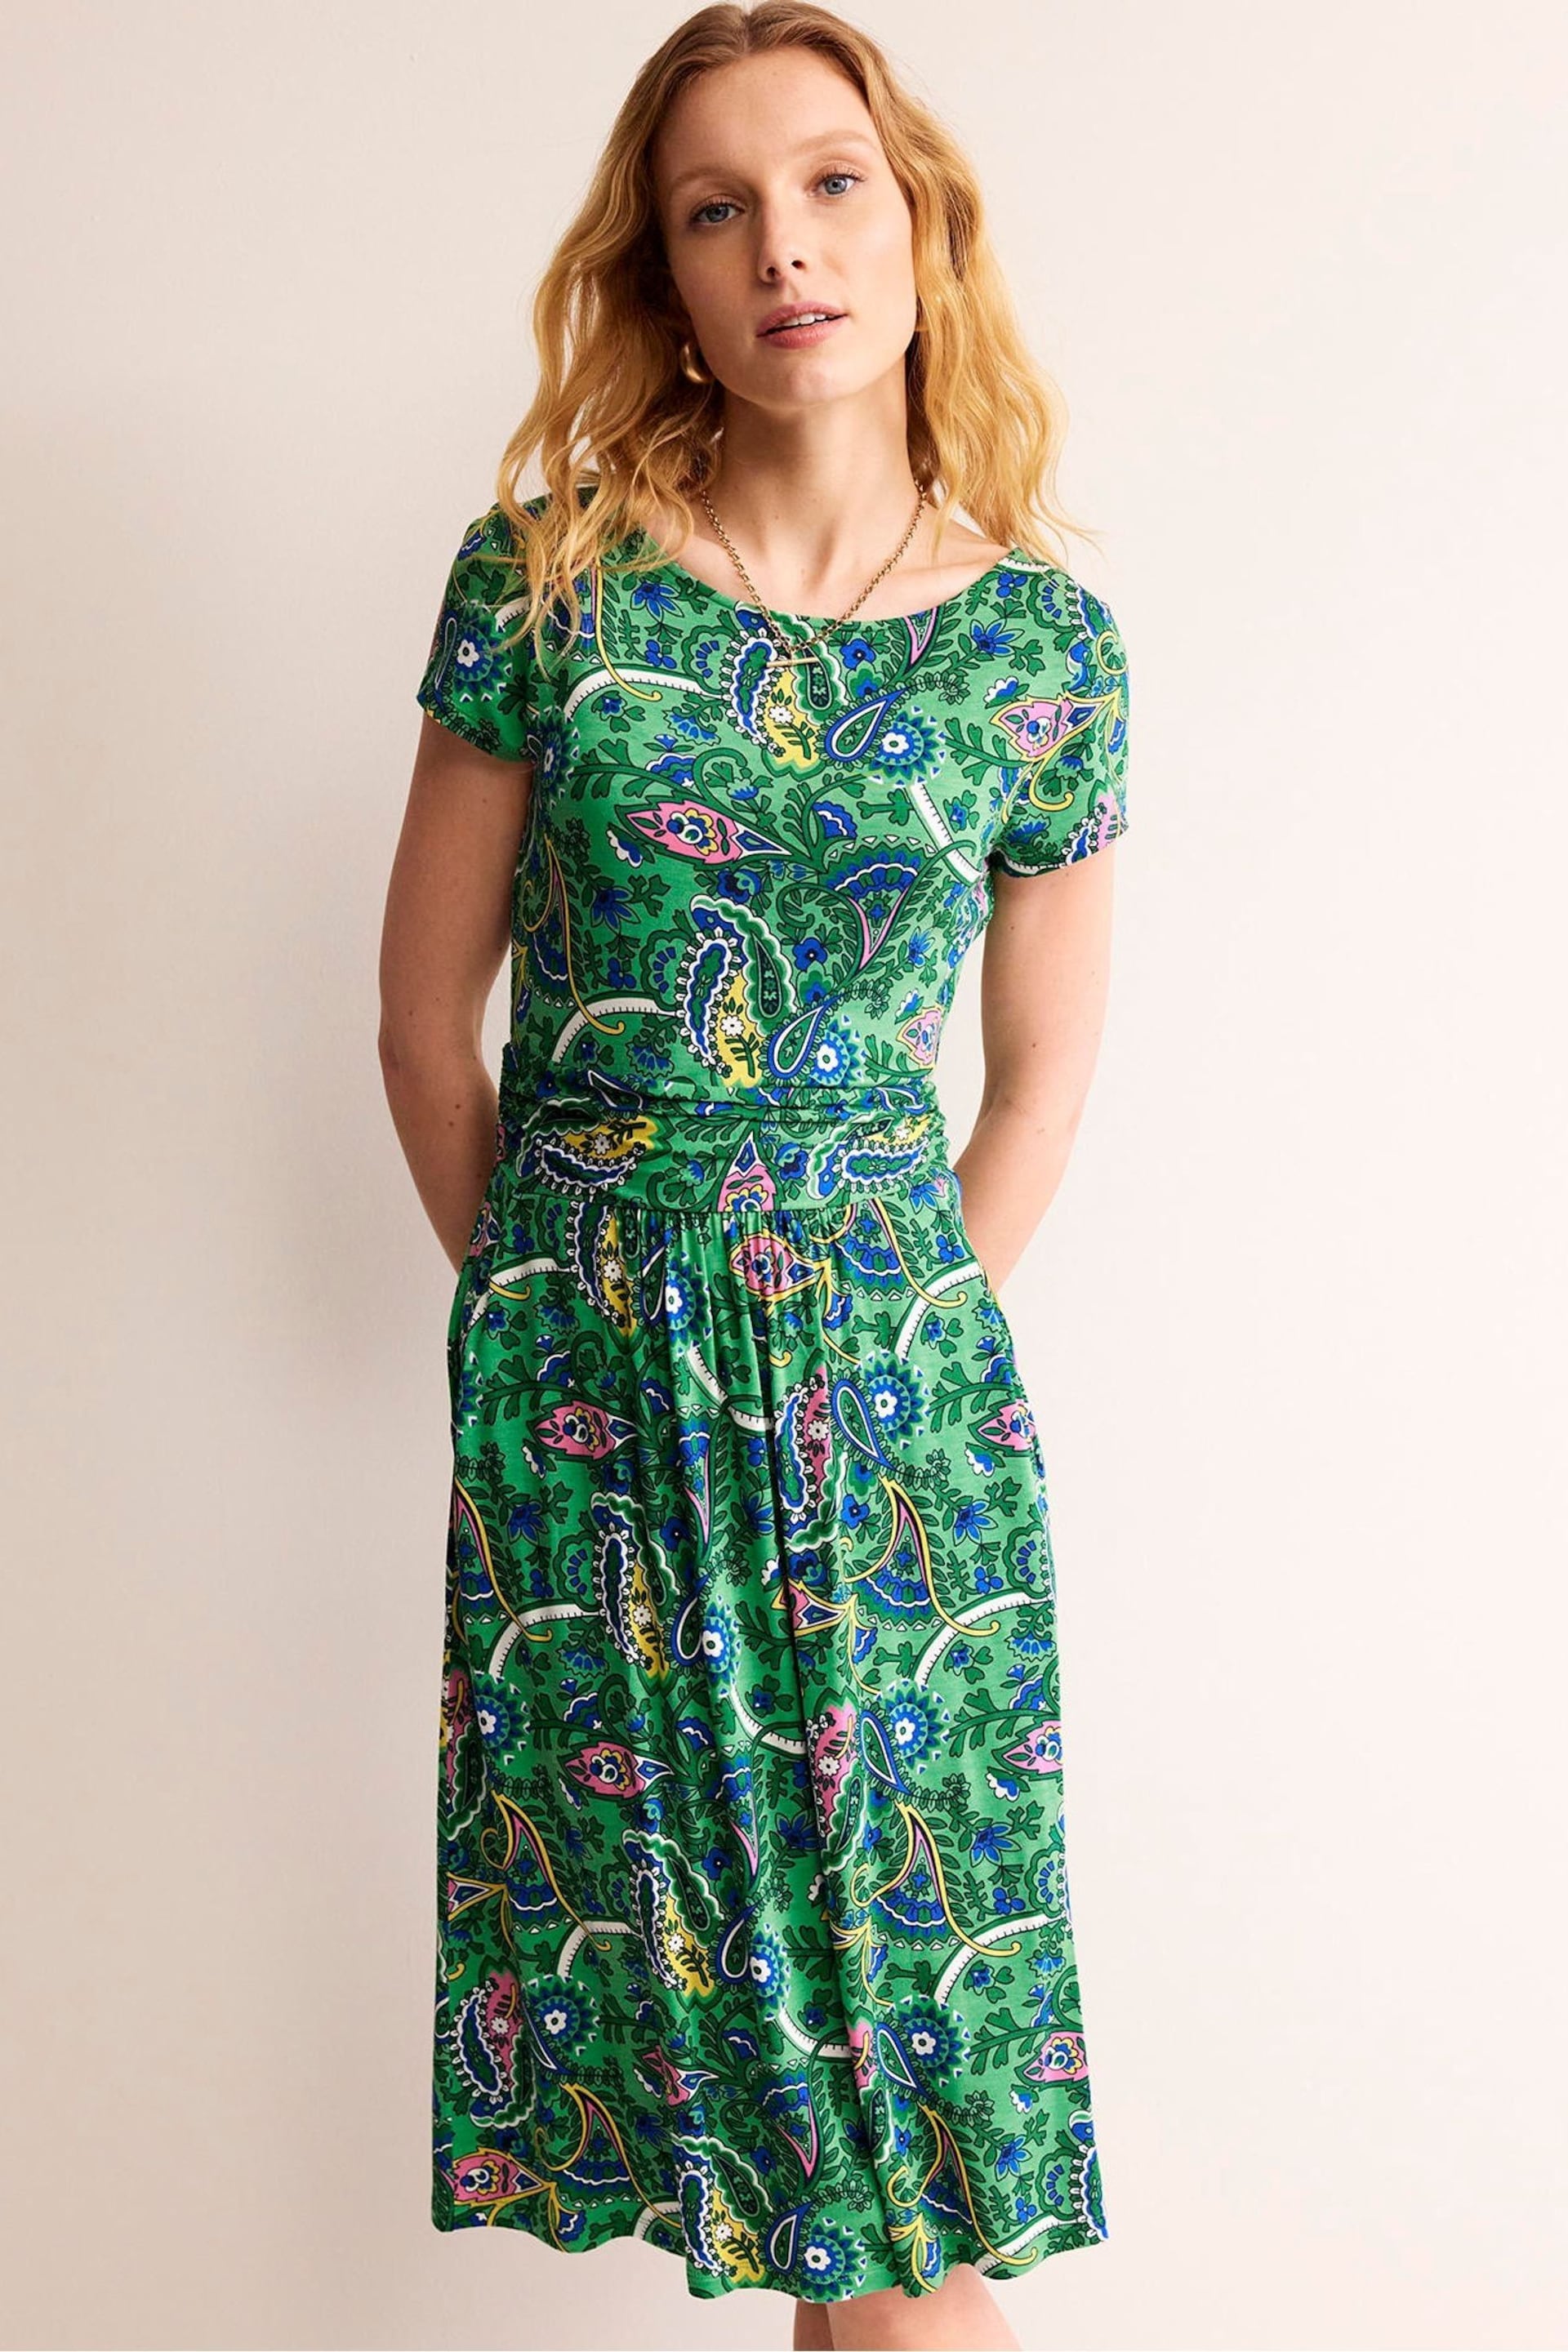 Boden Green Amelie Jersey Dress - Image 4 of 5